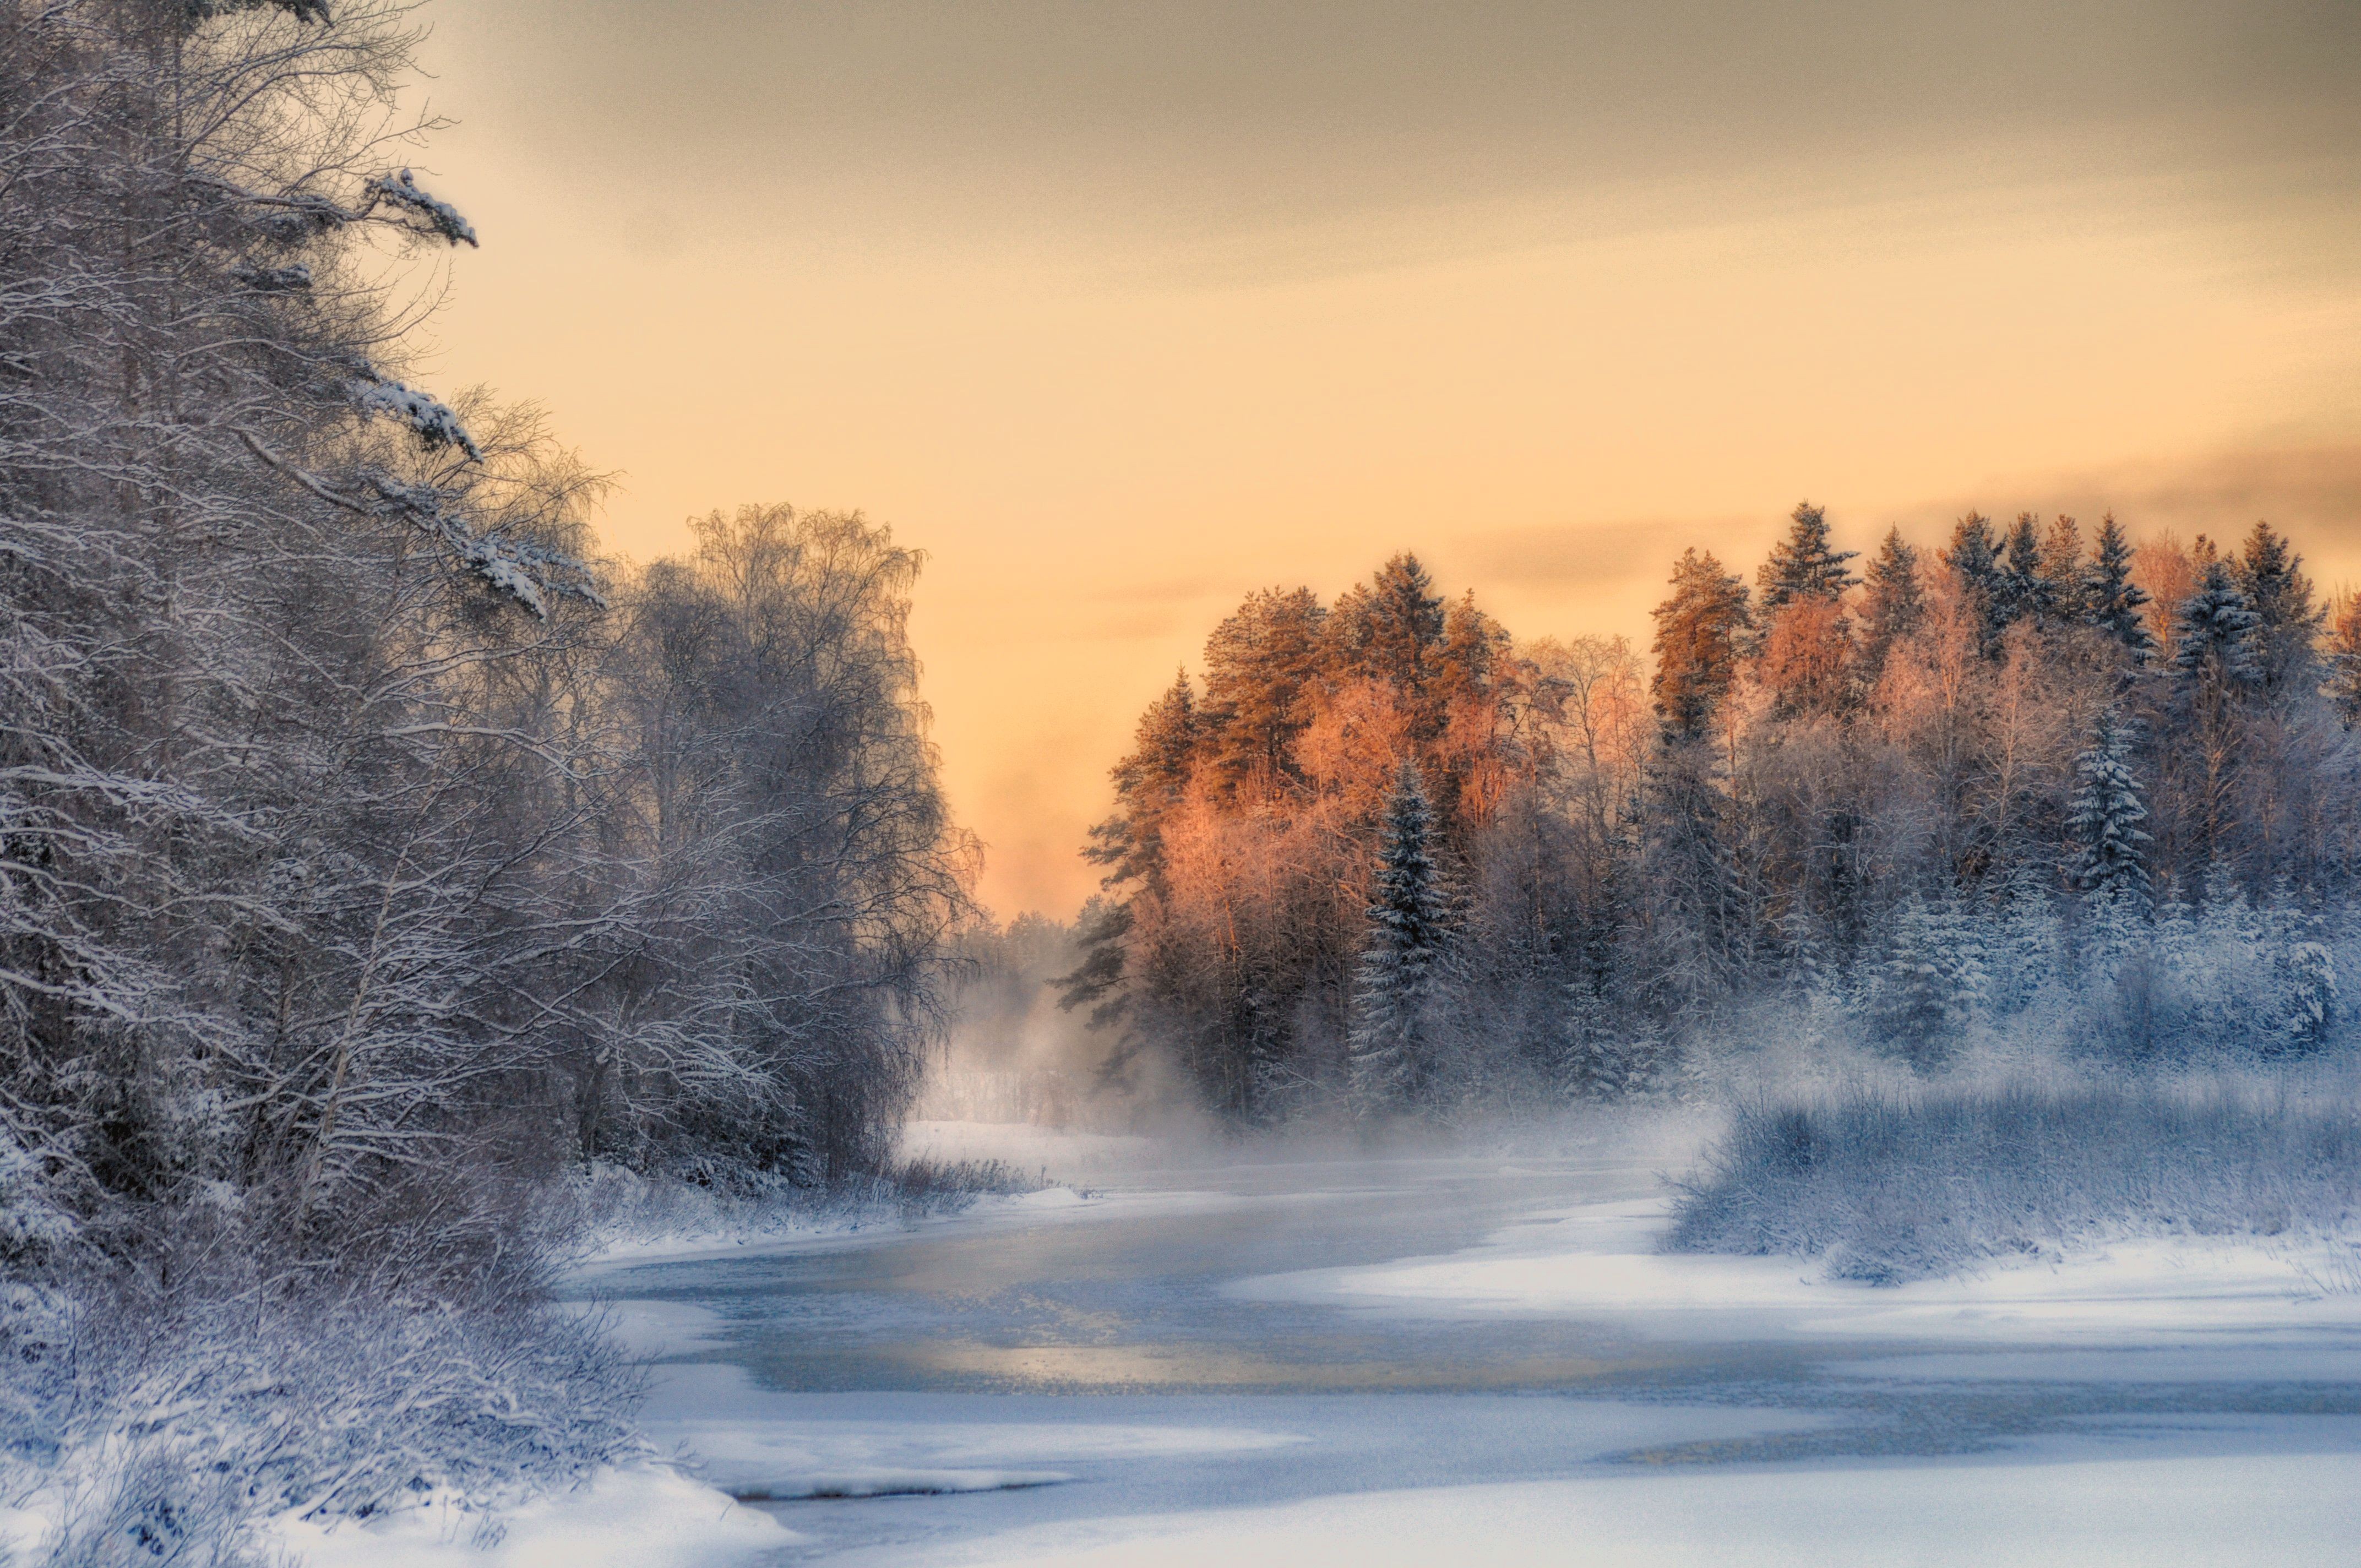 General 4288x2848 winter Finland trees landscape nature snow ice river